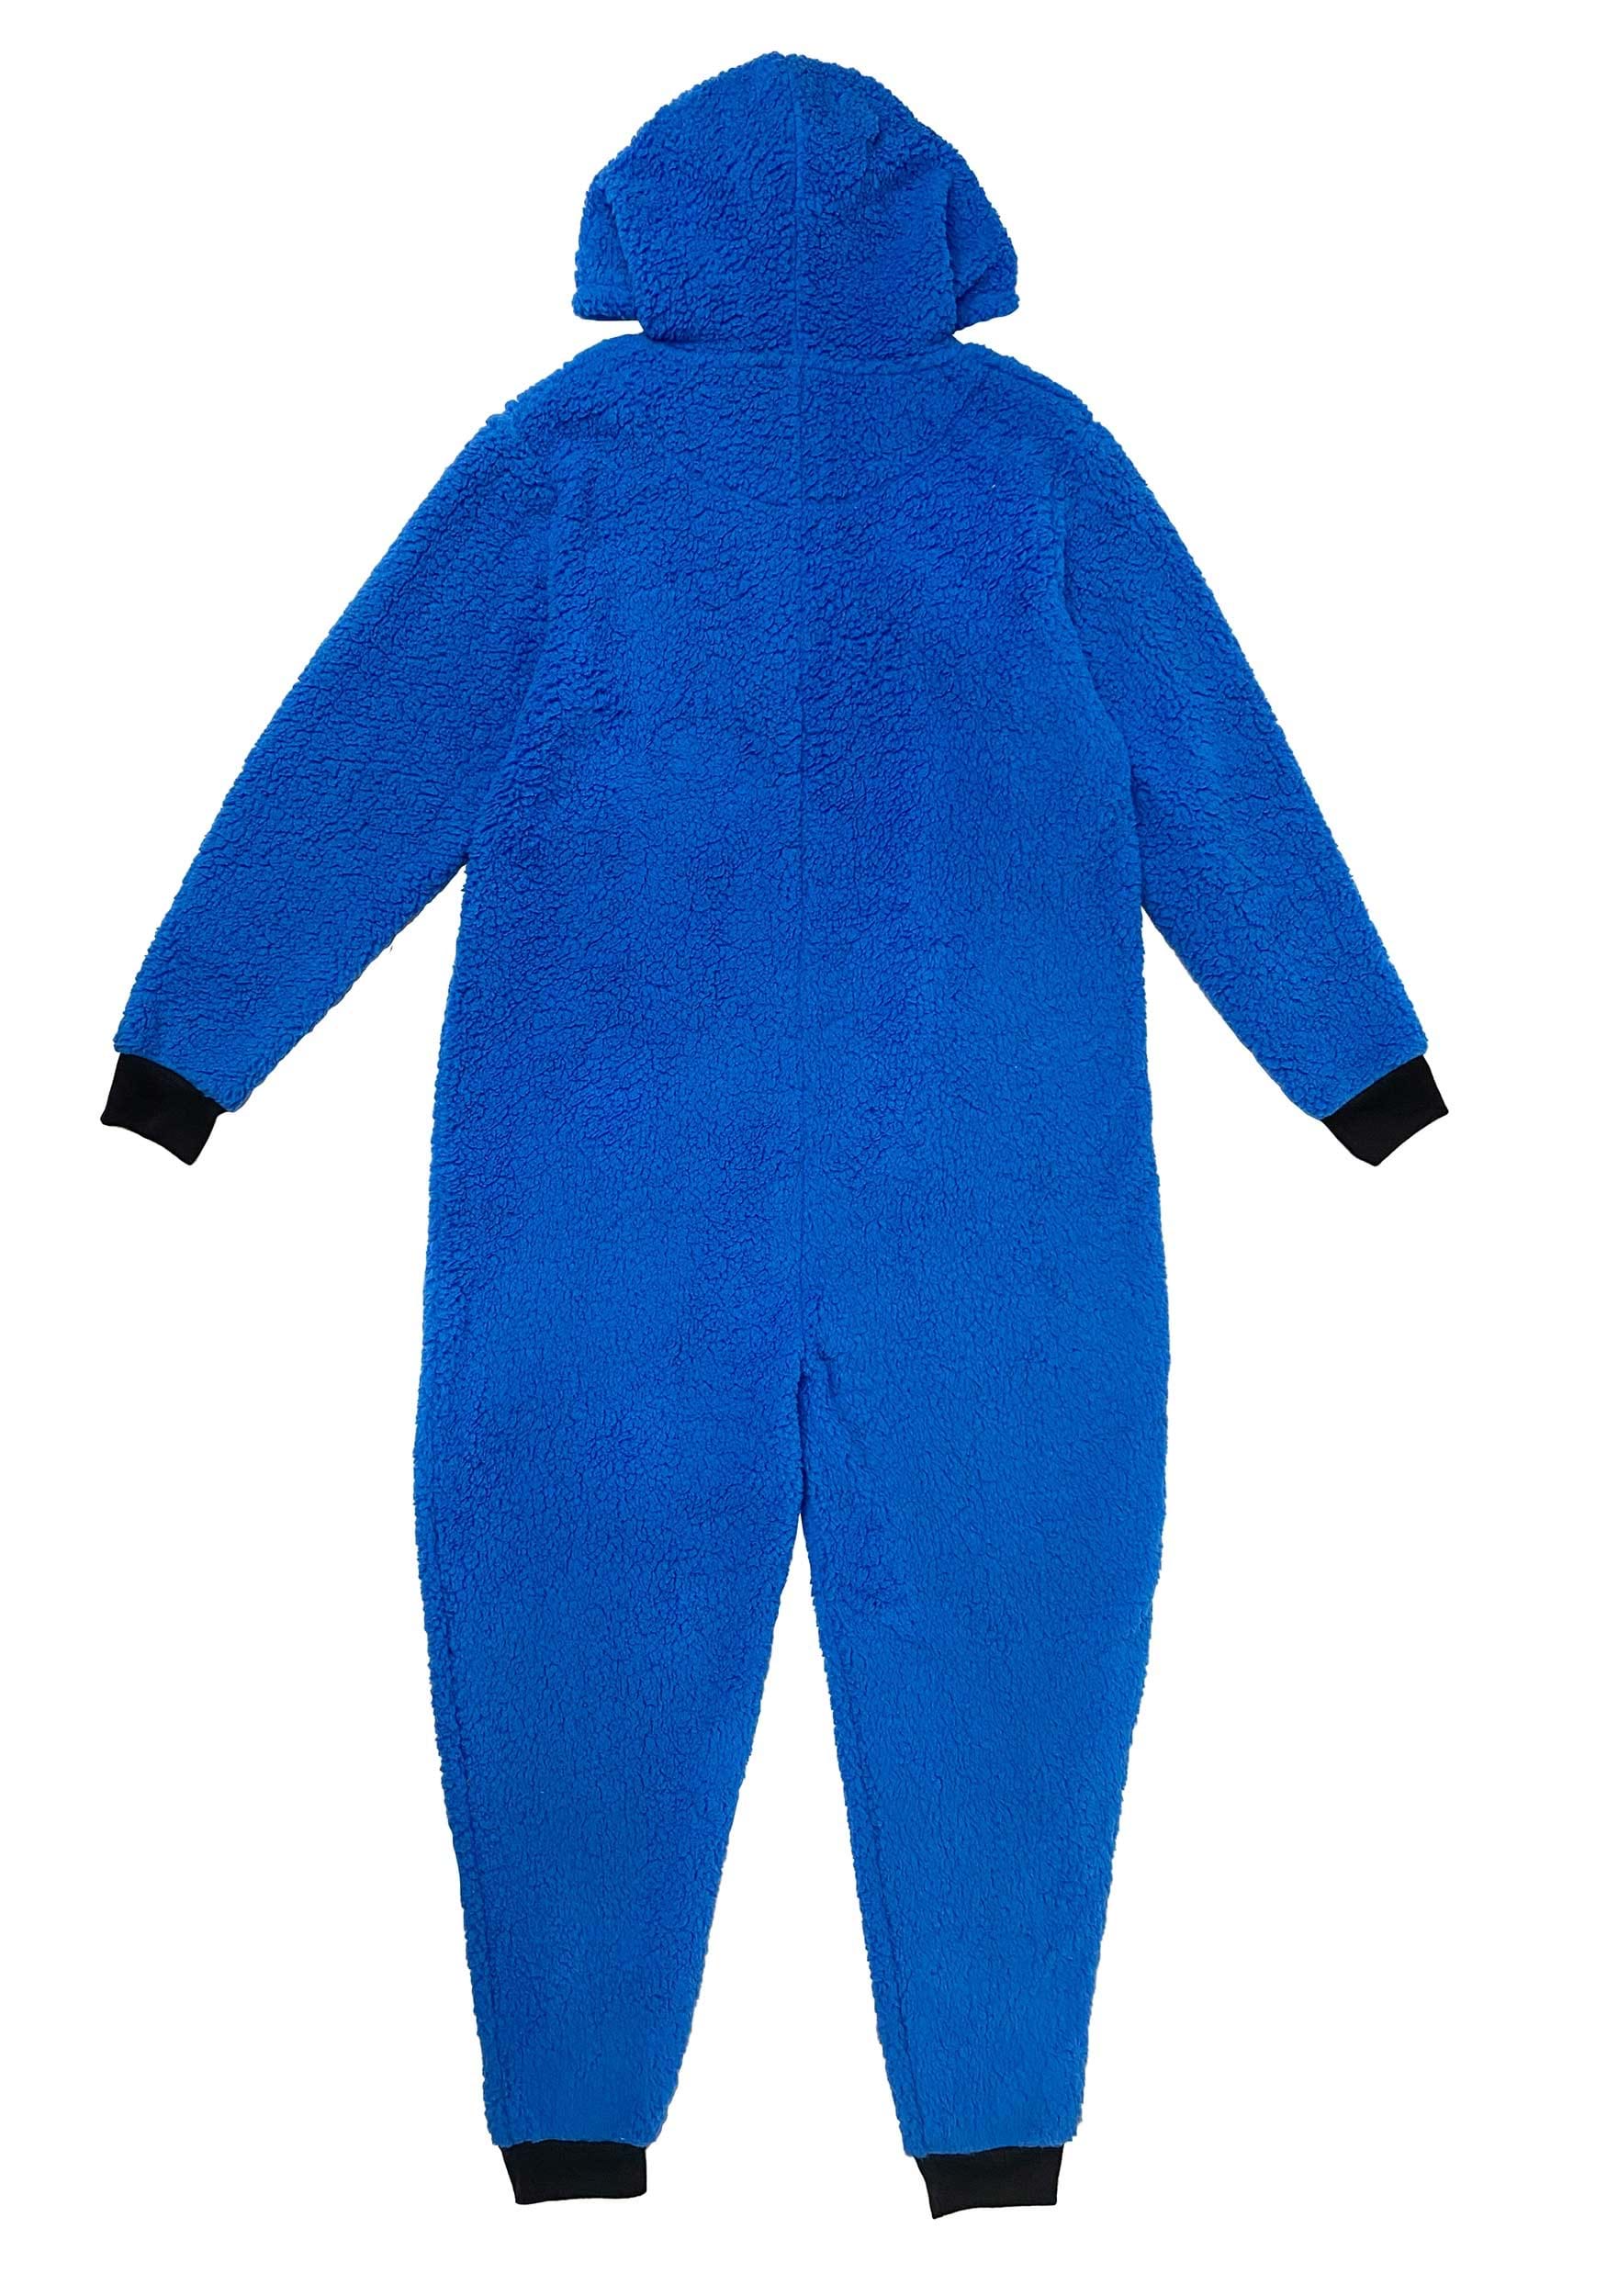 Sesame Street Cookie Monster Sherpa Union Suit